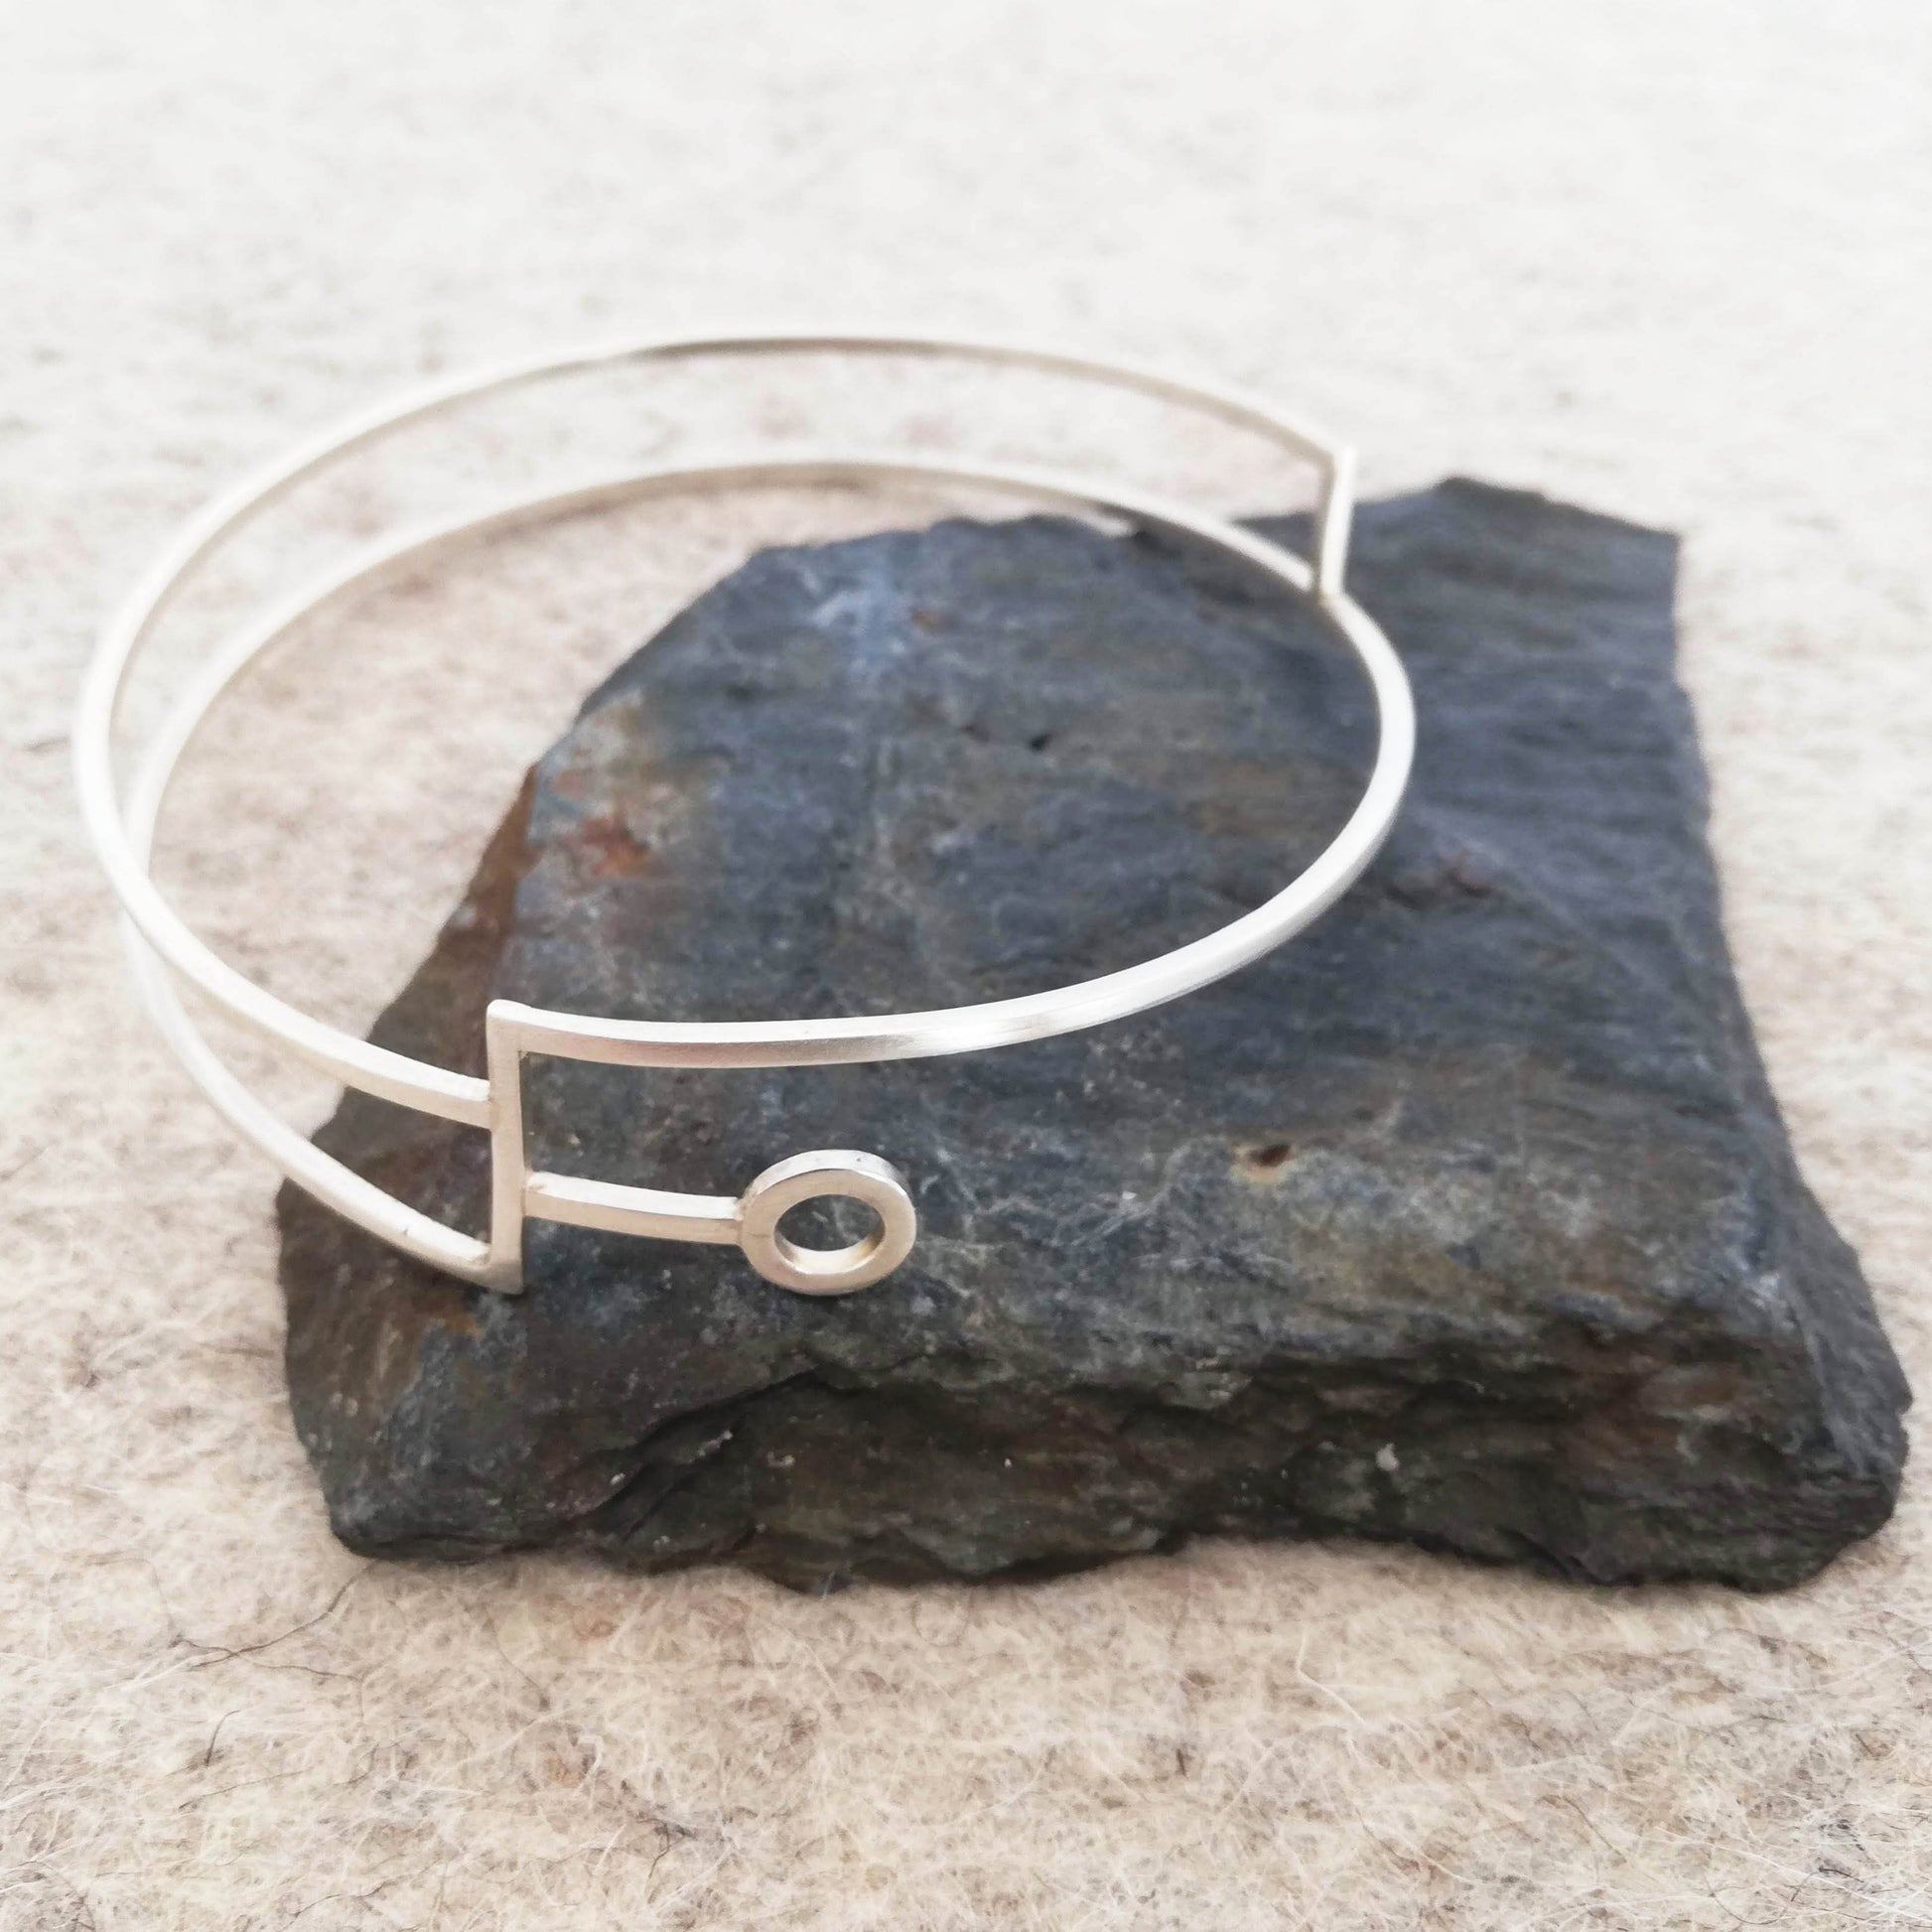 Silver linear bangle with circle detail by Inplico Design. Linear Bangle 1 made by Roz Adams